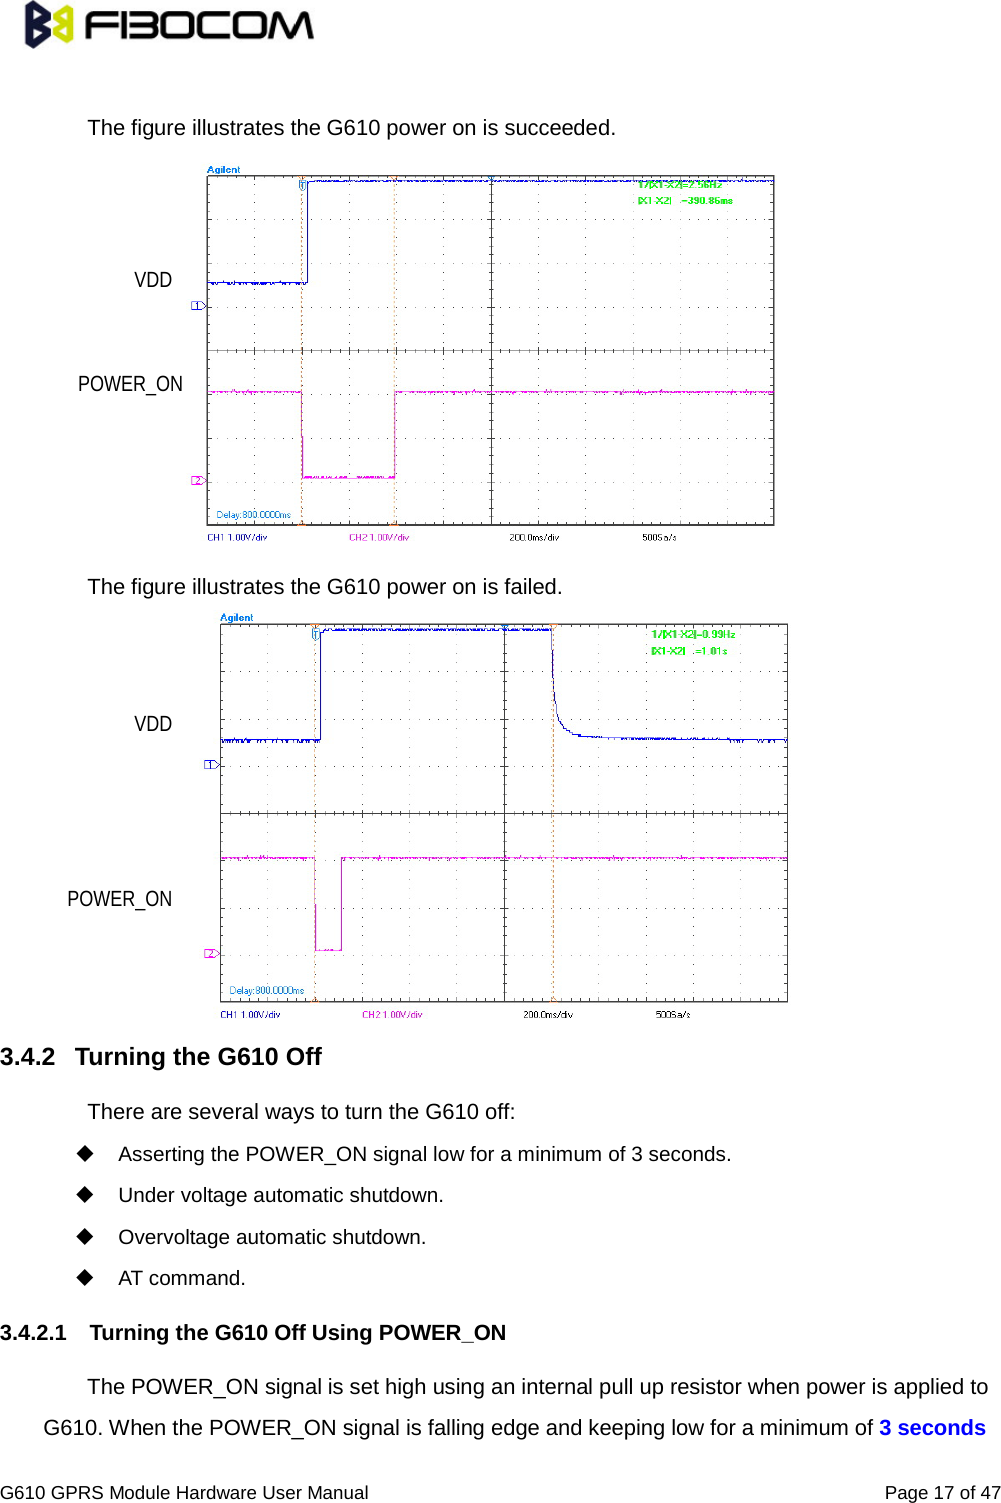                                                                                                          G610 GPRS Module Hardware User Manual                                                          Page 17 of 47   The figure illustrates the G610 power on is succeeded.           The figure illustrates the G610 power on is failed.             3.4.2 Turning the G610 Off   There are several ways to turn the G610 off:    Asserting the POWER_ON signal low for a minimum of 3 seconds.    Under voltage automatic shutdown.    Overvoltage automatic shutdown.  AT command.   3.4.2.1 Turning the G610 Off Using POWER_ON   The POWER_ON signal is set high using an internal pull up resistor when power is applied to G610. When the POWER_ON signal is falling edge and keeping low for a minimum of 3 seconds VDD POWER_ON VDD POWER_ON 